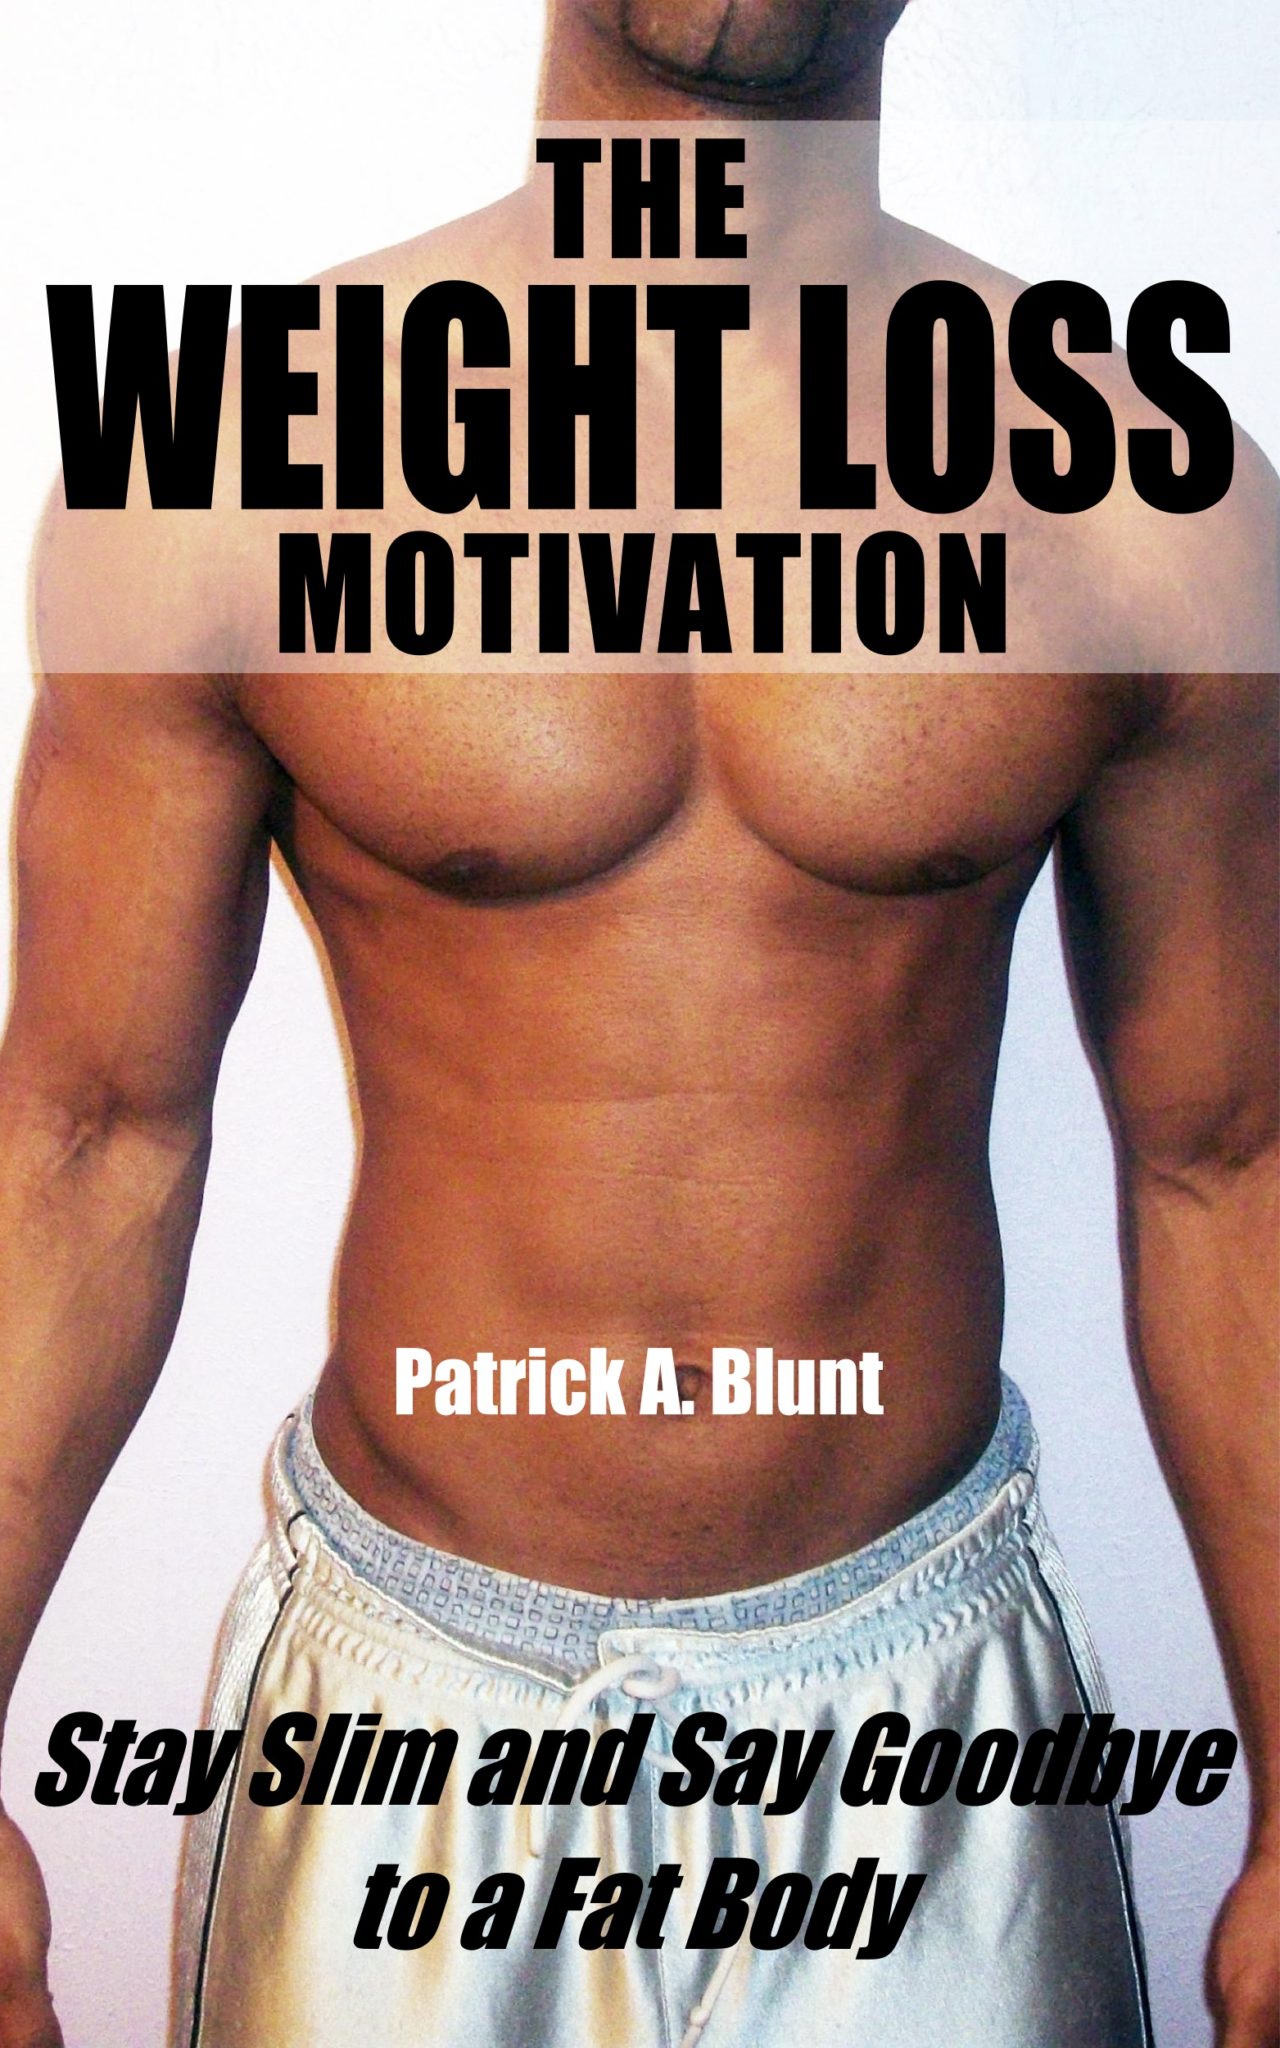 FREE: The Weight Loss Motivation: Stay Slim and Say Goodbye to a Fat Body by Patrick A. Blunt